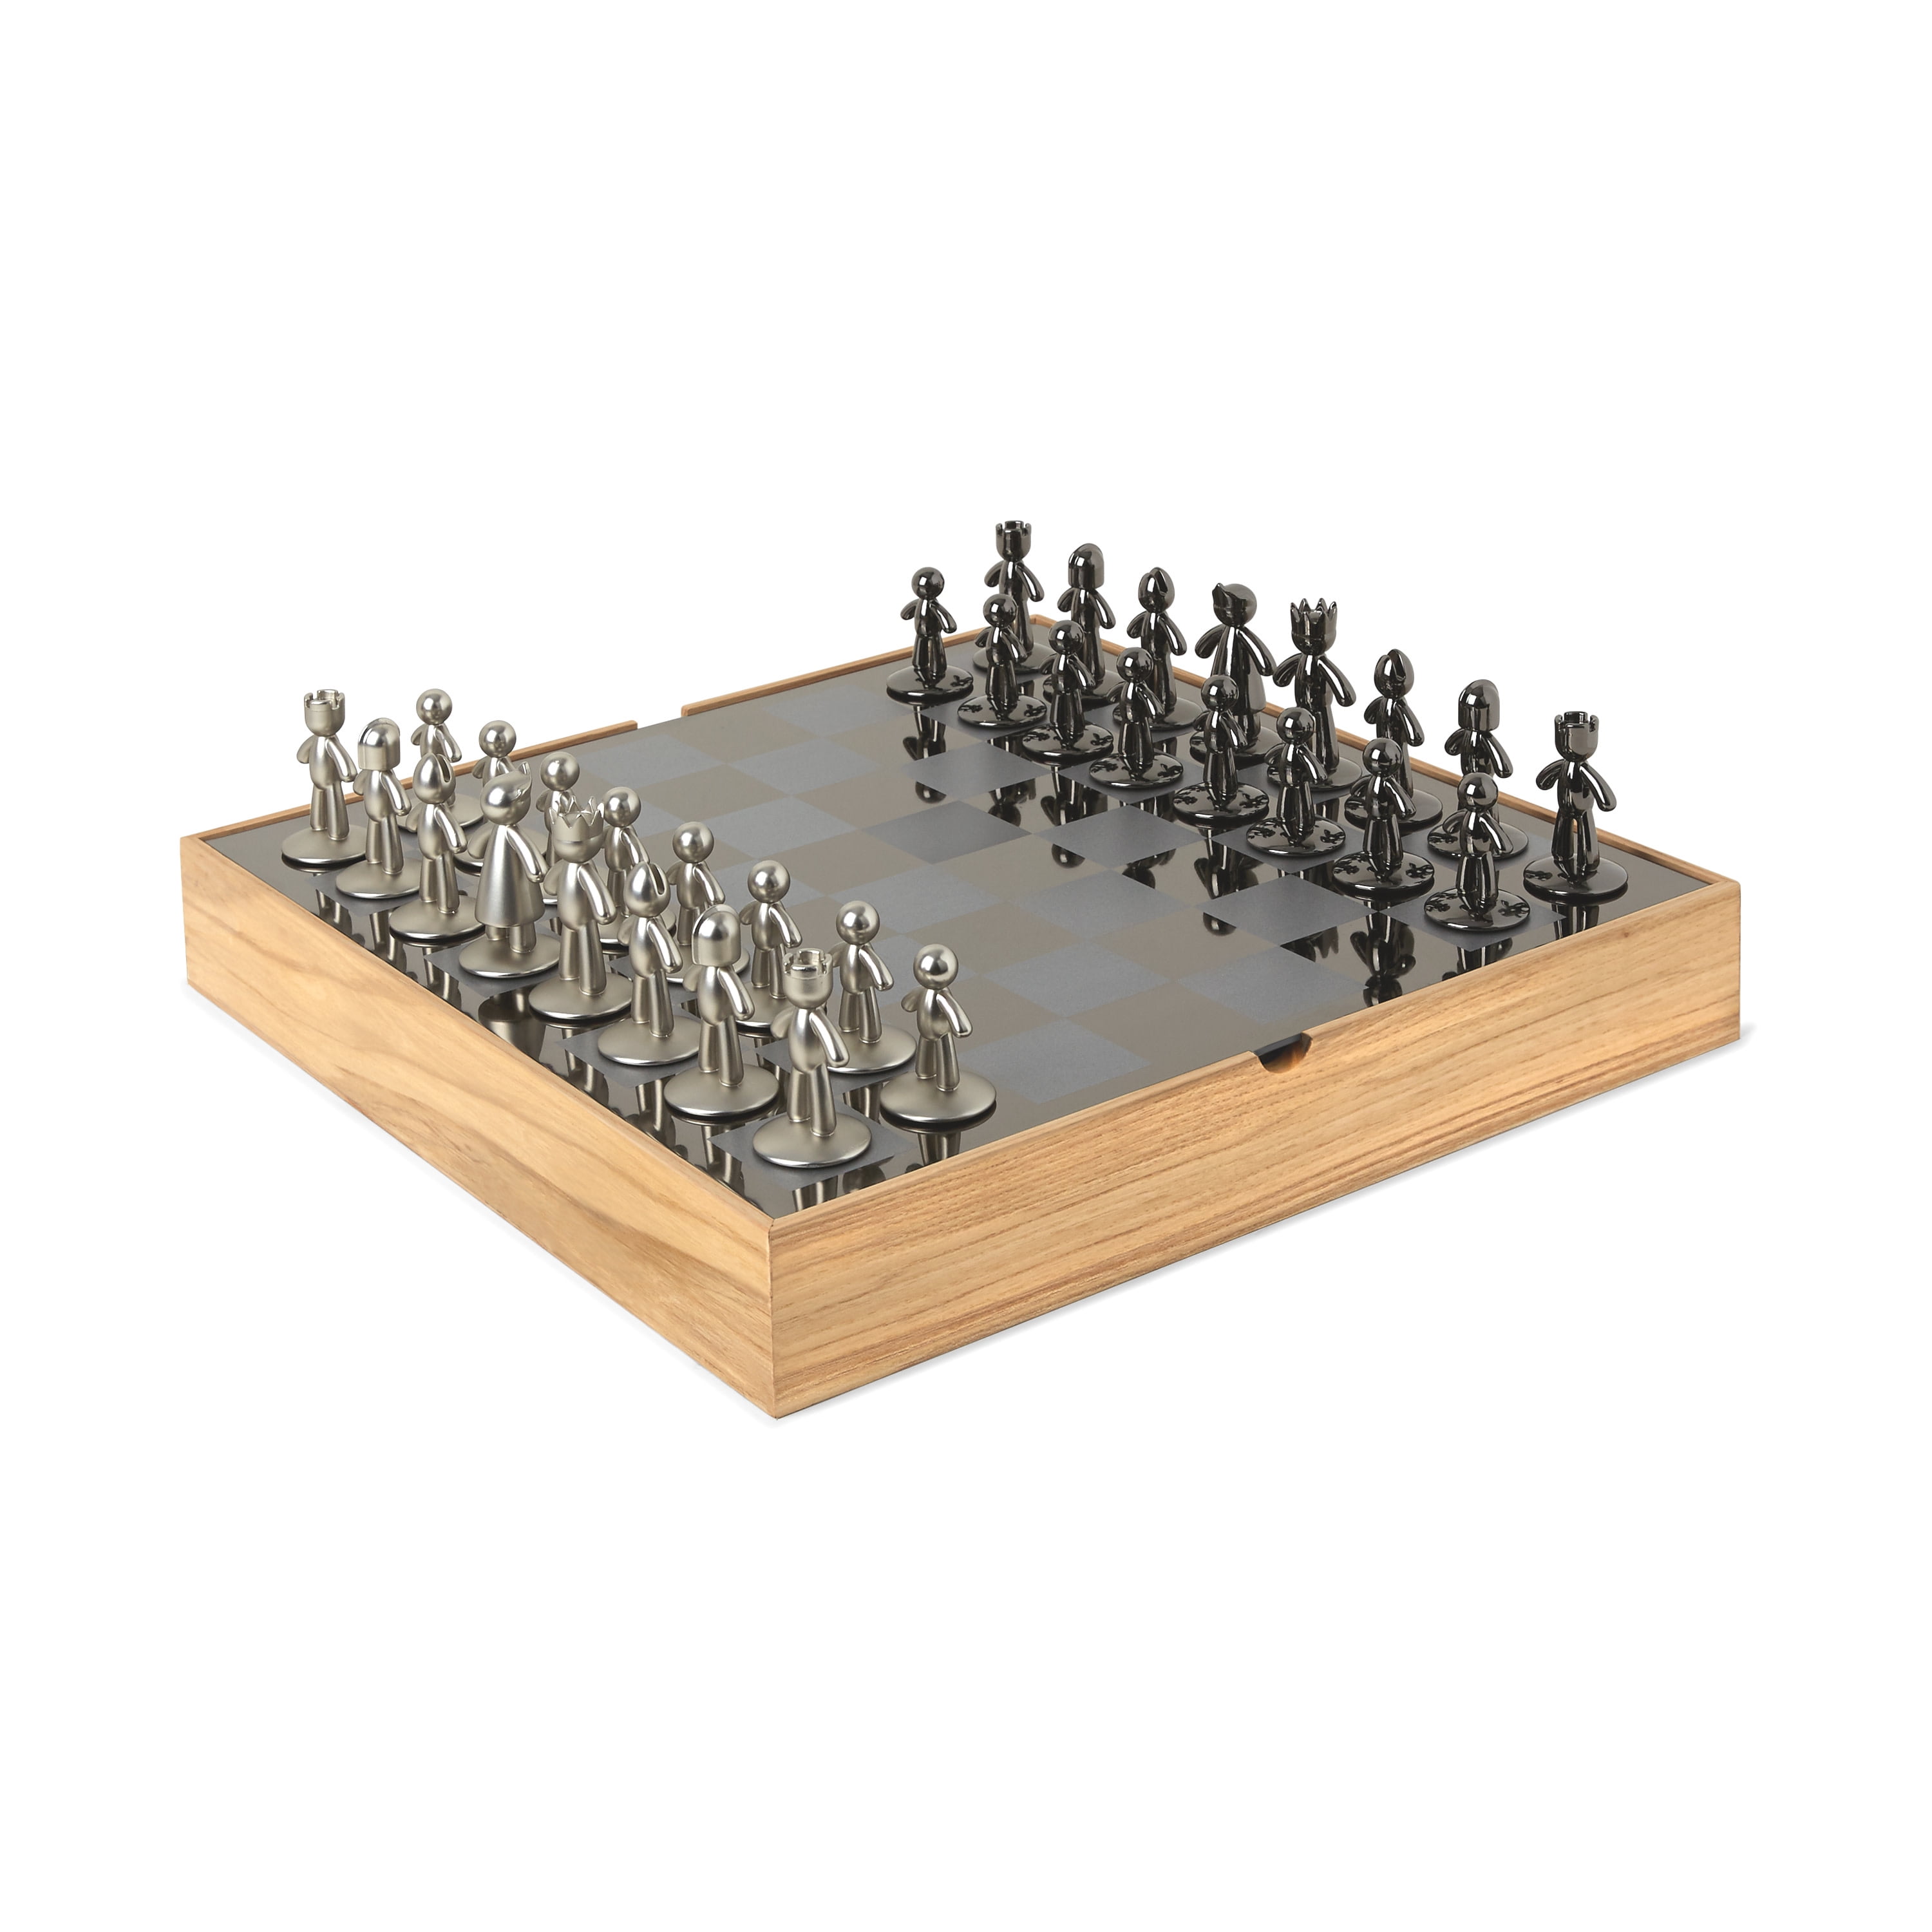 Destiny Chess Set USAopoly Brand NEW FREE SHIPPING 